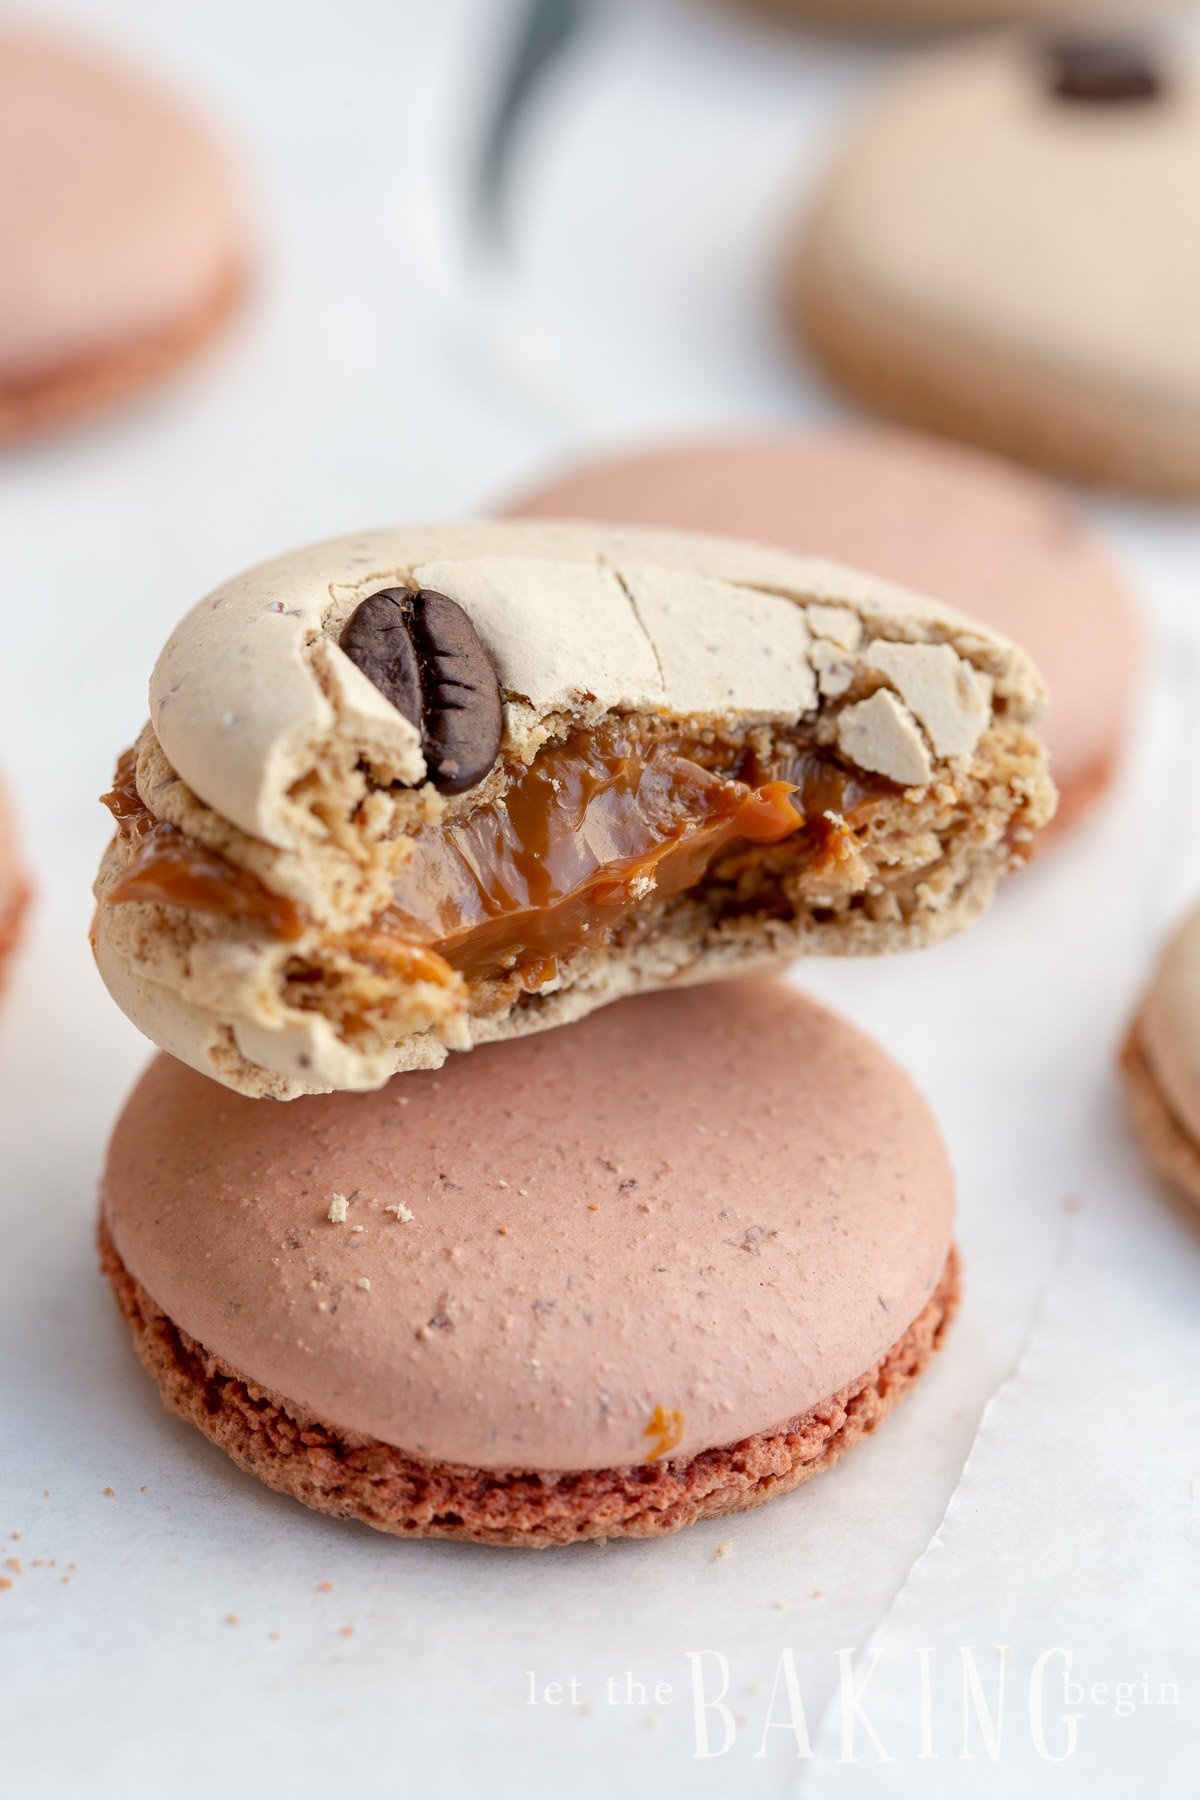 Dulce de Leche Macaron Recipe uses Coffee Flavored Italian Macaron Shell recipe and dulce de leche as the filling. Gluten free, coffee flavored little meringue confections are amazing with a cup of coffee. 